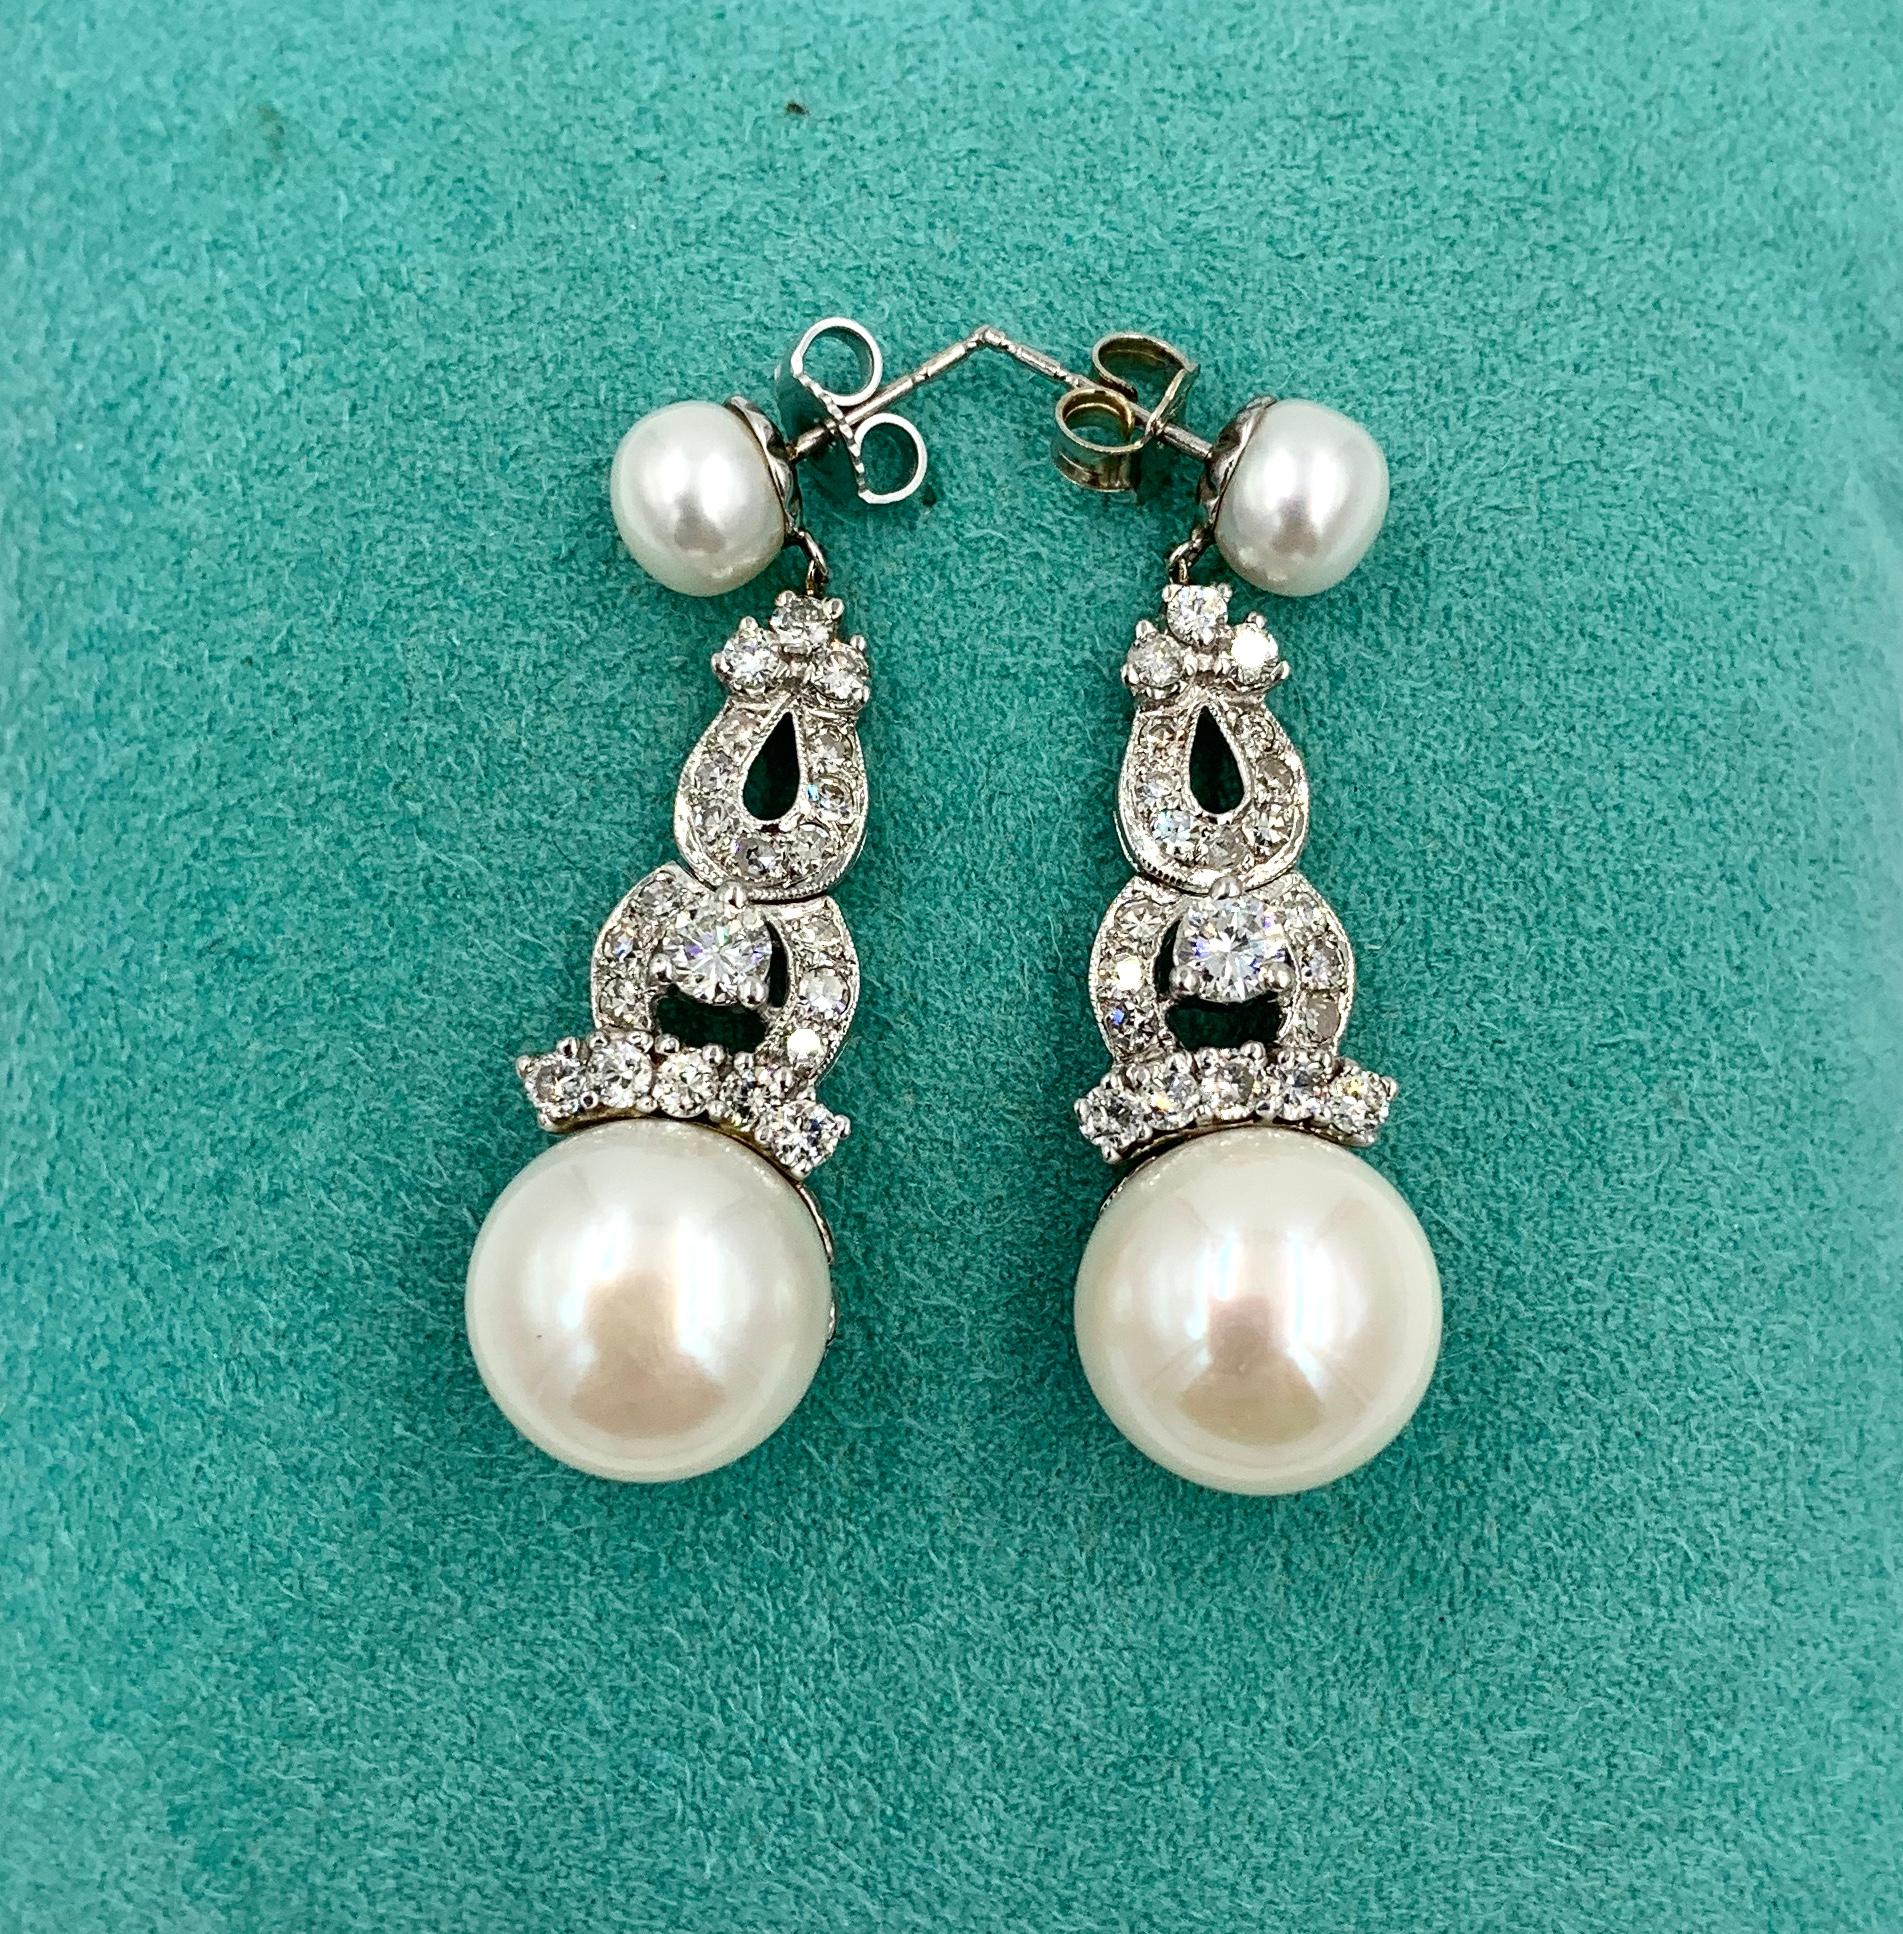 A stunning pair of Art Deco - Hollywood Regency style Earrings.  The earrings are set with 44 radiant white Diamonds which total 1.7 Carats.  The earrings have gorgeous 13mm white Pearls at the bottom and they hang from 7mm Pearls at the top.  The